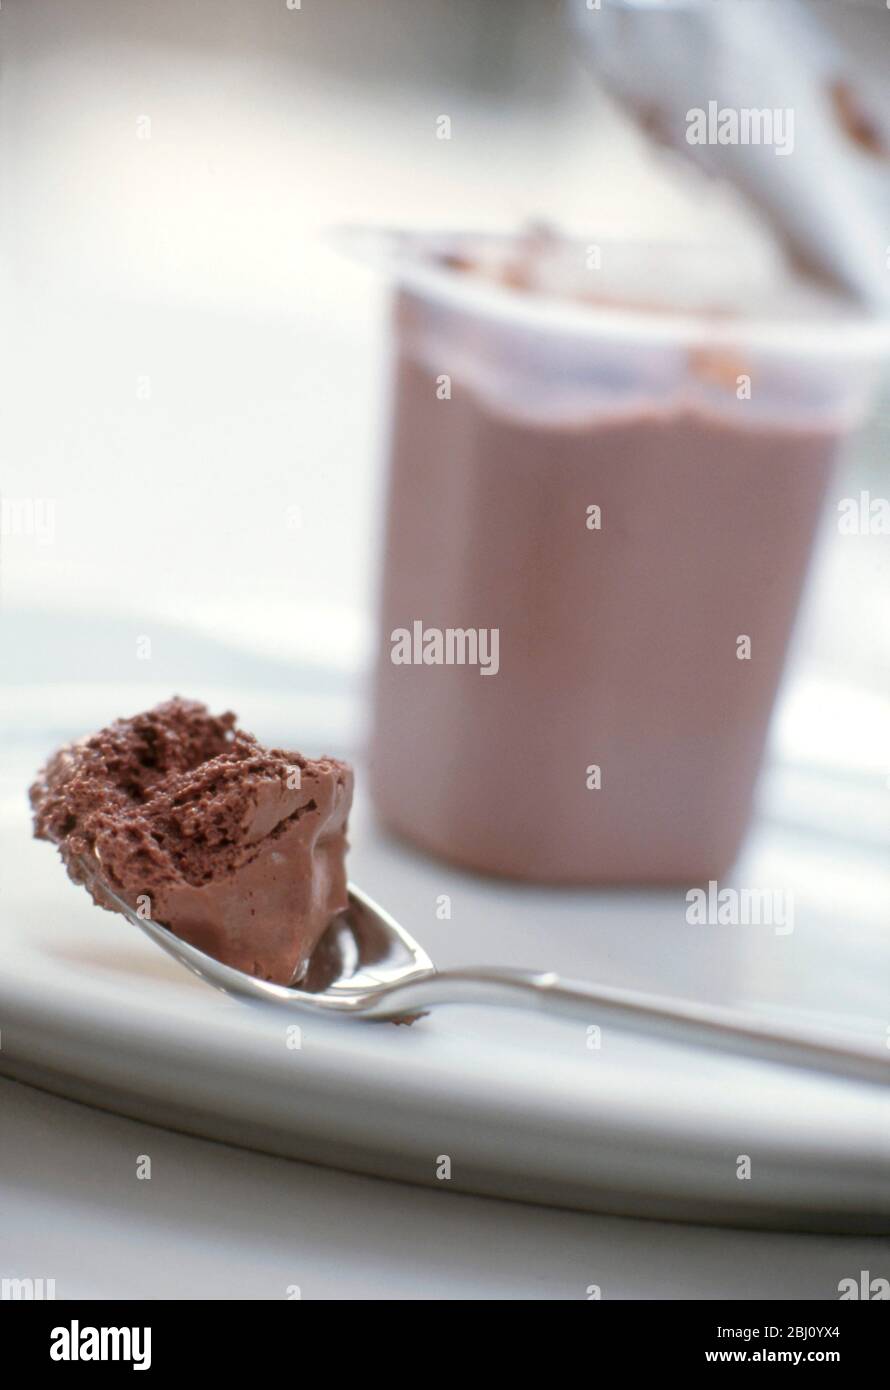 Spoonful of light chocolate shop bought mousse with open tub behind on white plate - Stock Photo